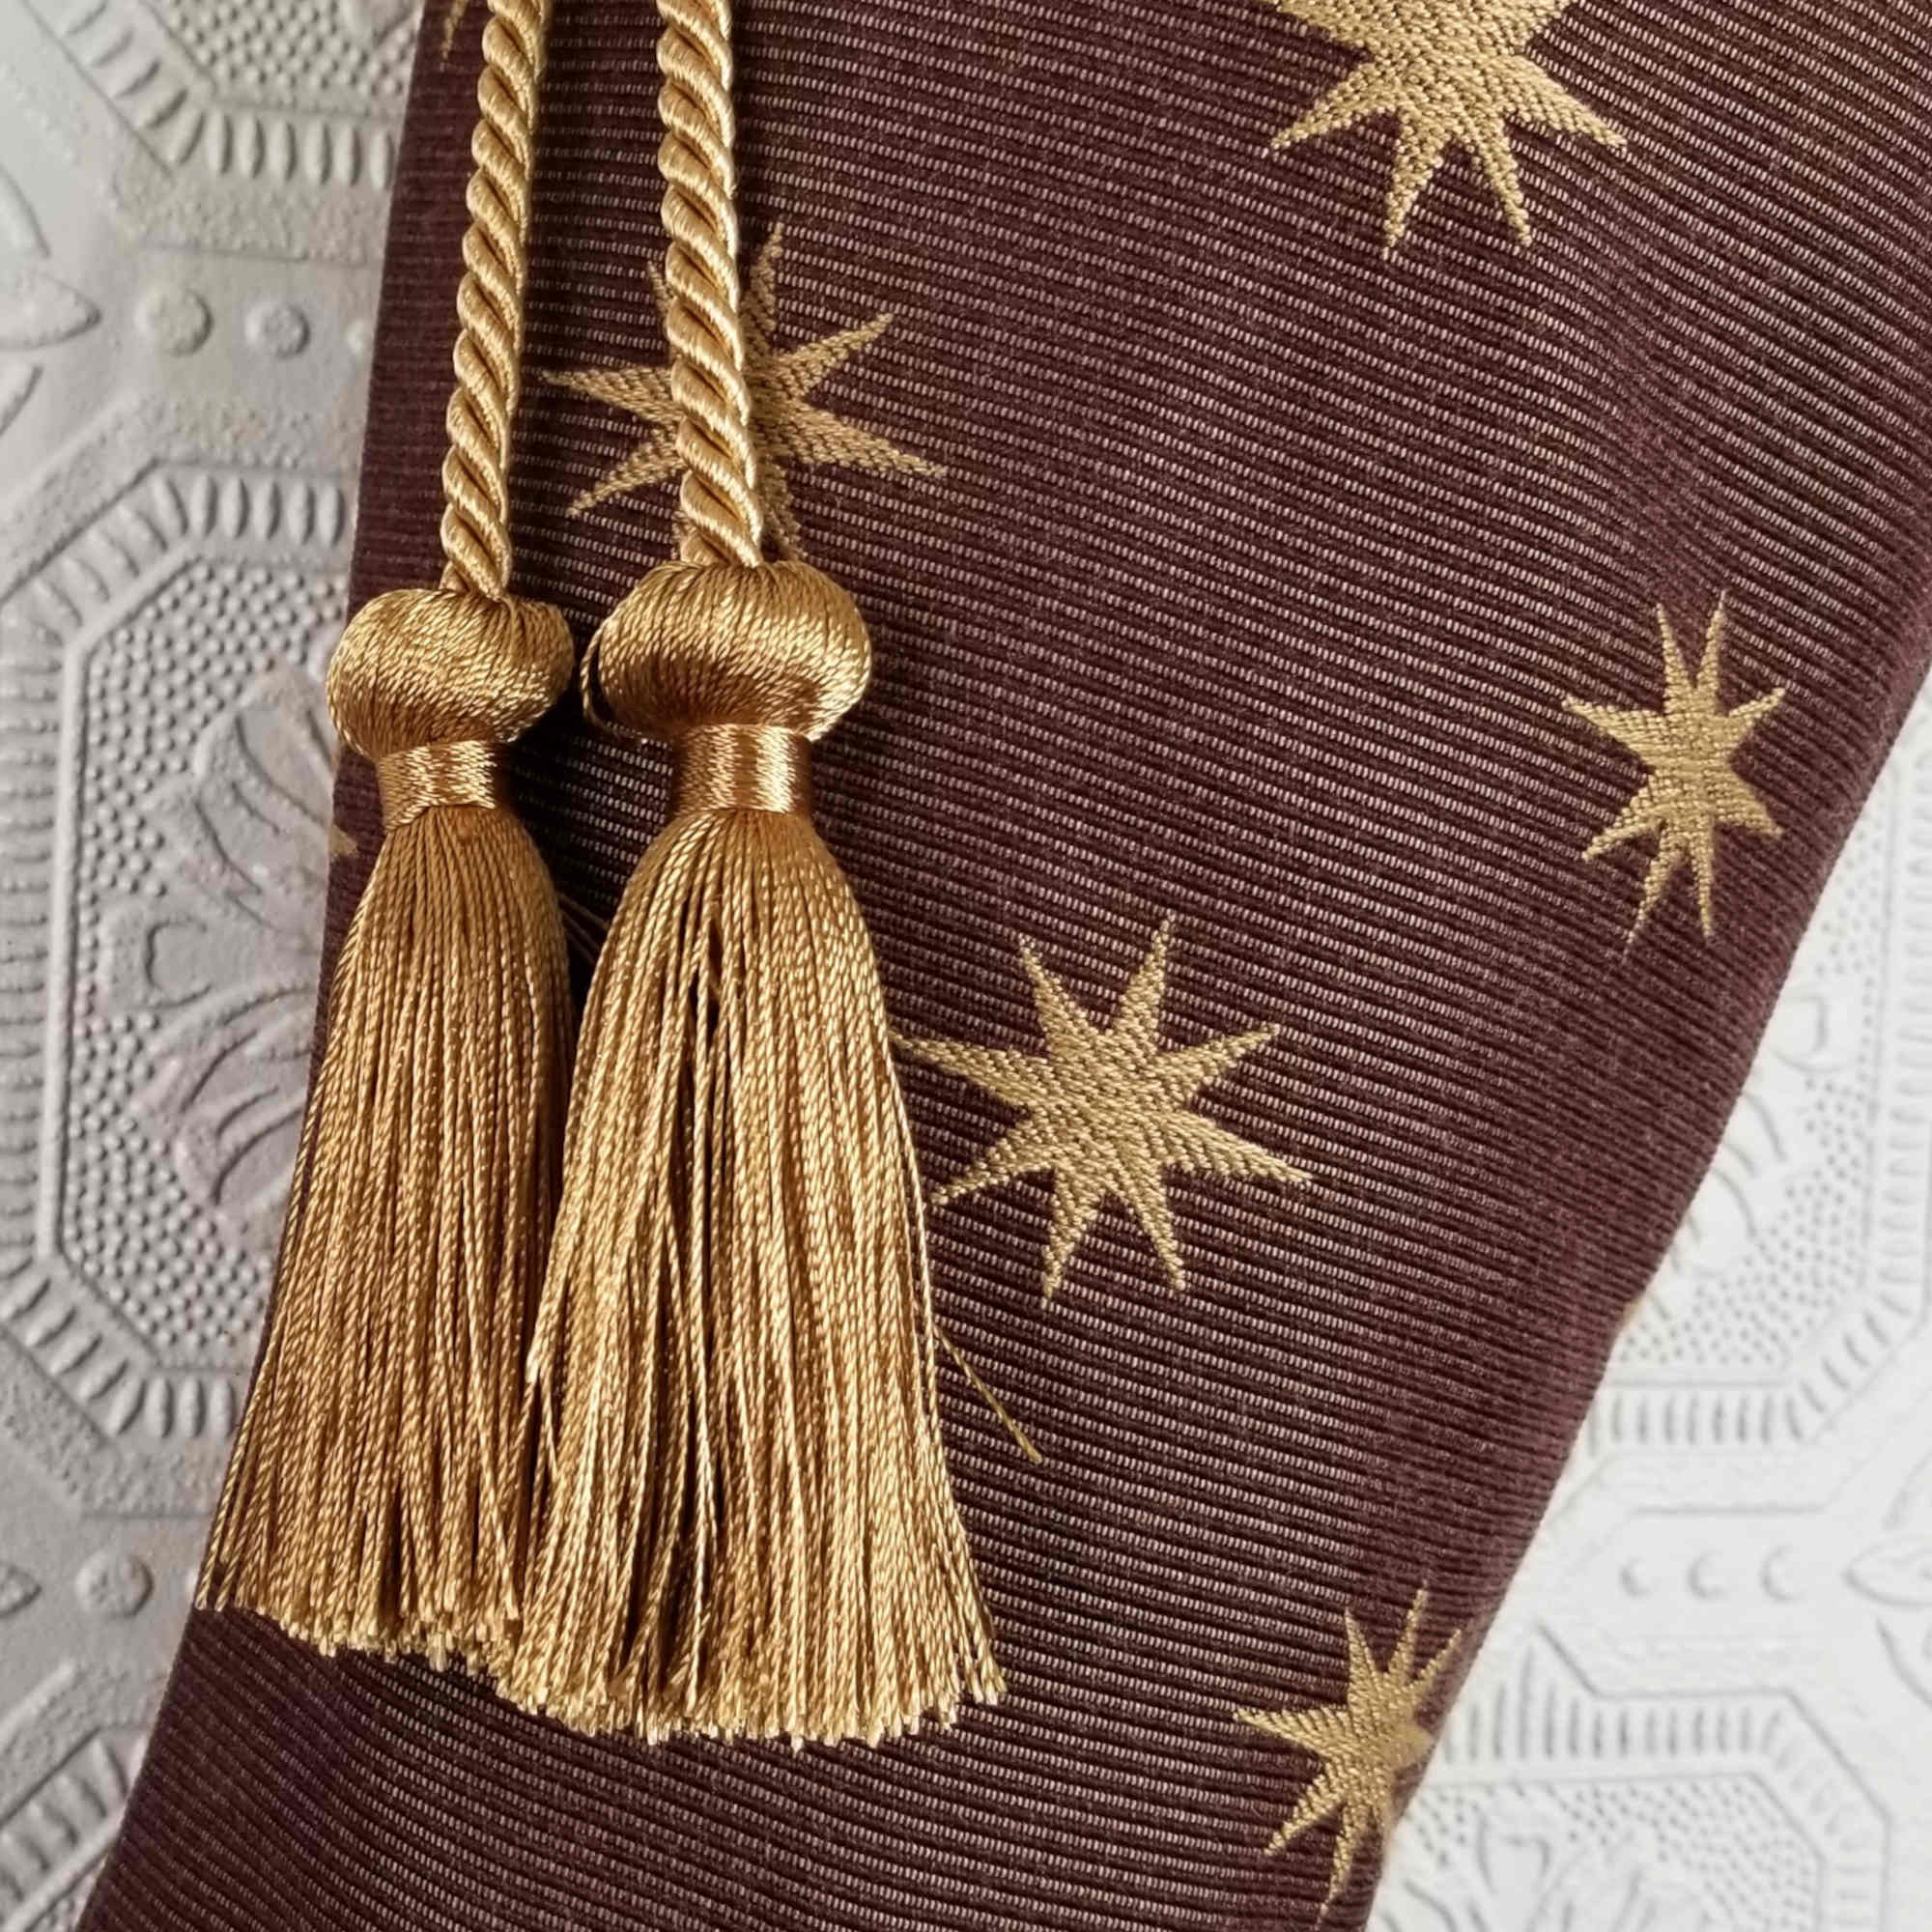 Detail of Melchior Christmas stocking, gold tassels on brown fabric with gold stars